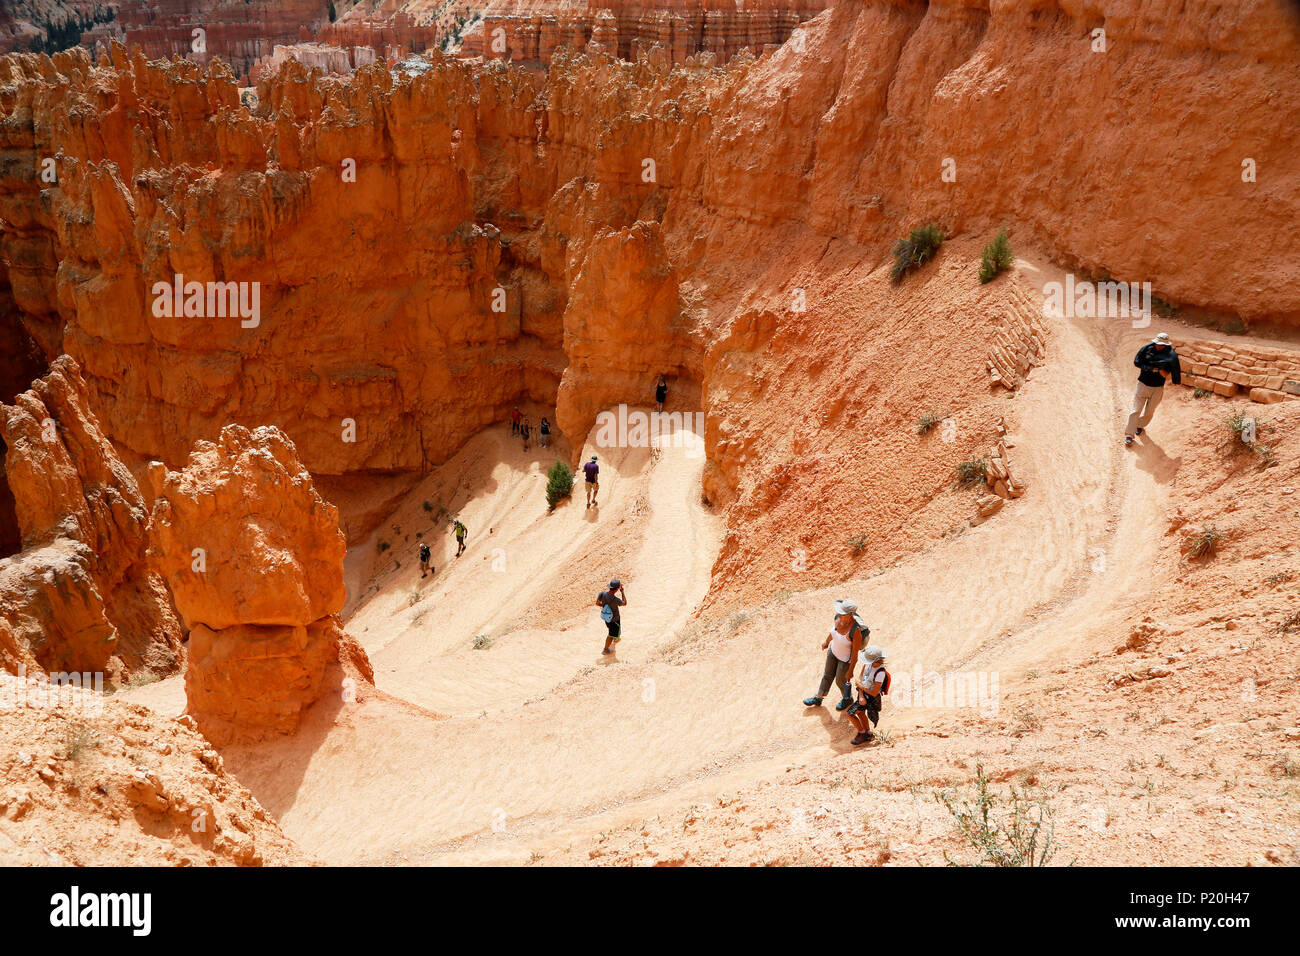 USA. Utah. Bryce Canyon. Sunset Point. Hiking Navajo Loop Trail. The spectacular descent at the bottom of the canyon. Hikers in the foreground. Stock Photo